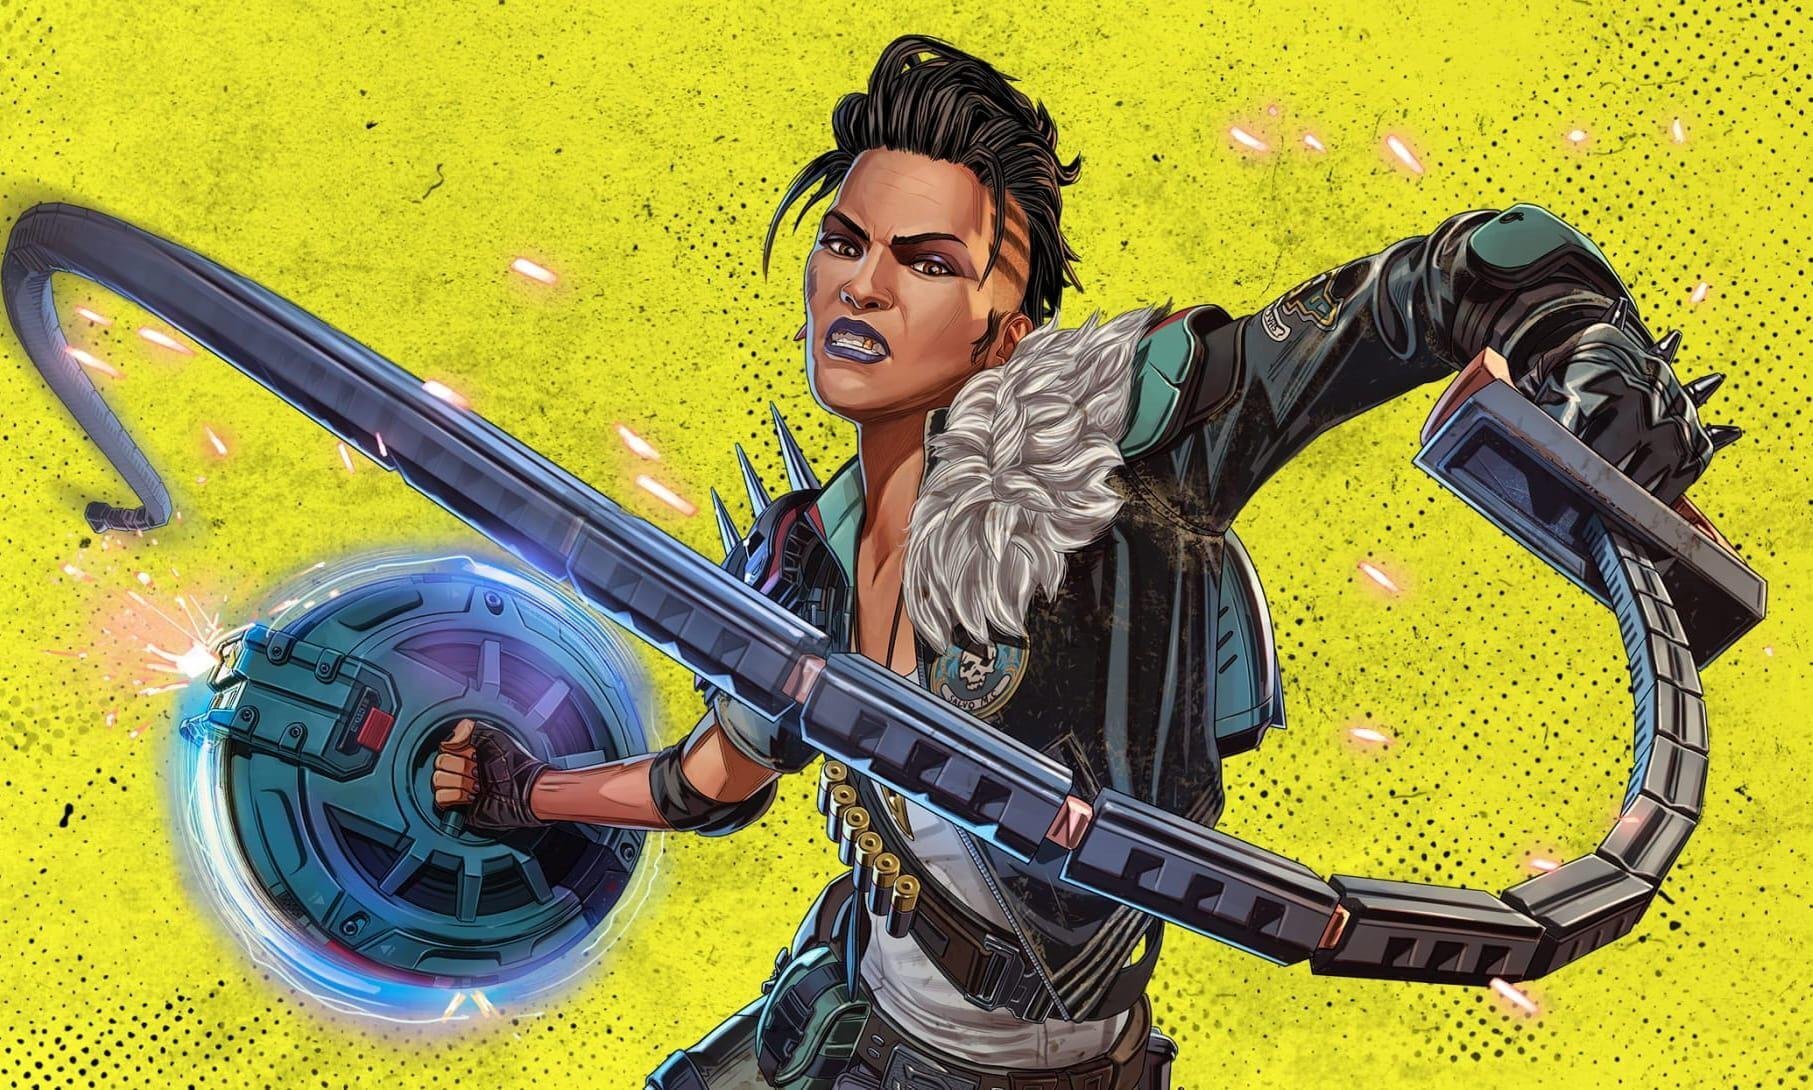 Apex Legends: Mad Maggie's Abilities Revealed